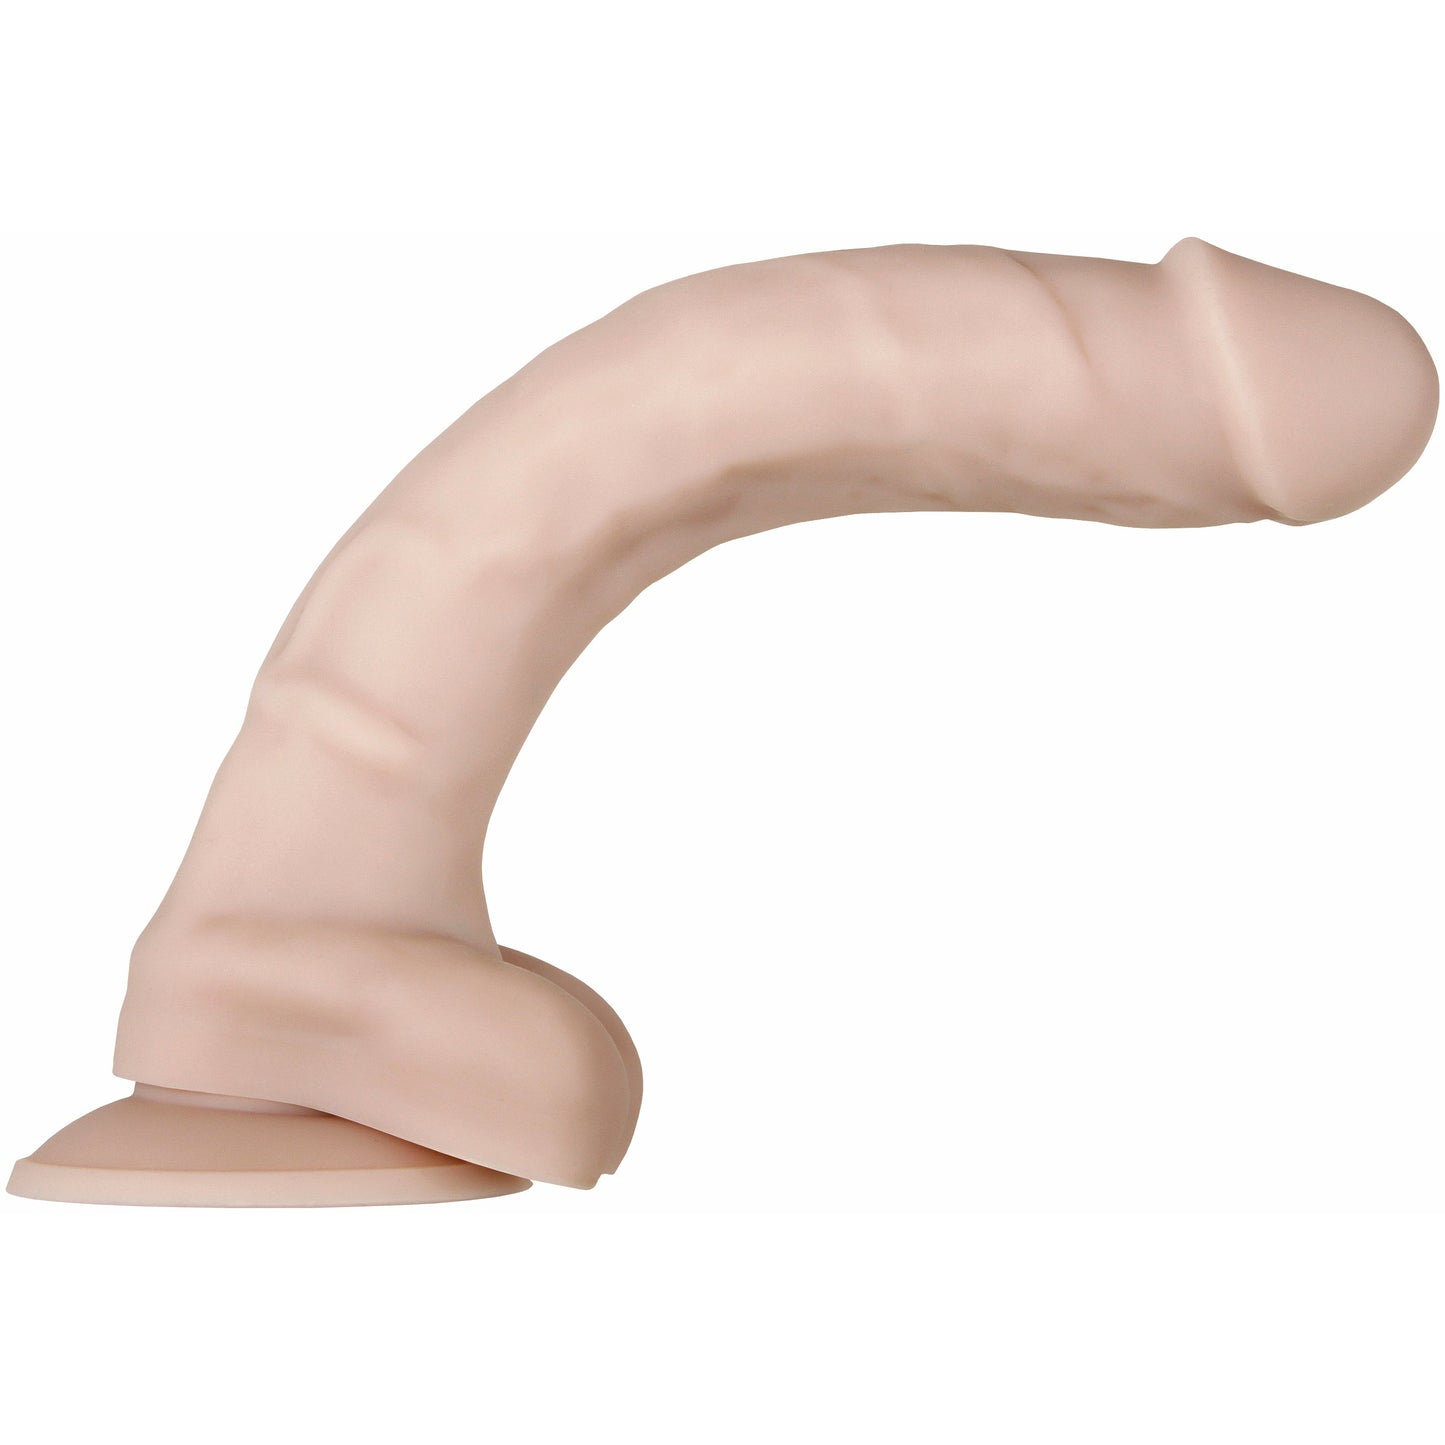 Real Supple Silicone Poseable 10.5 Inch